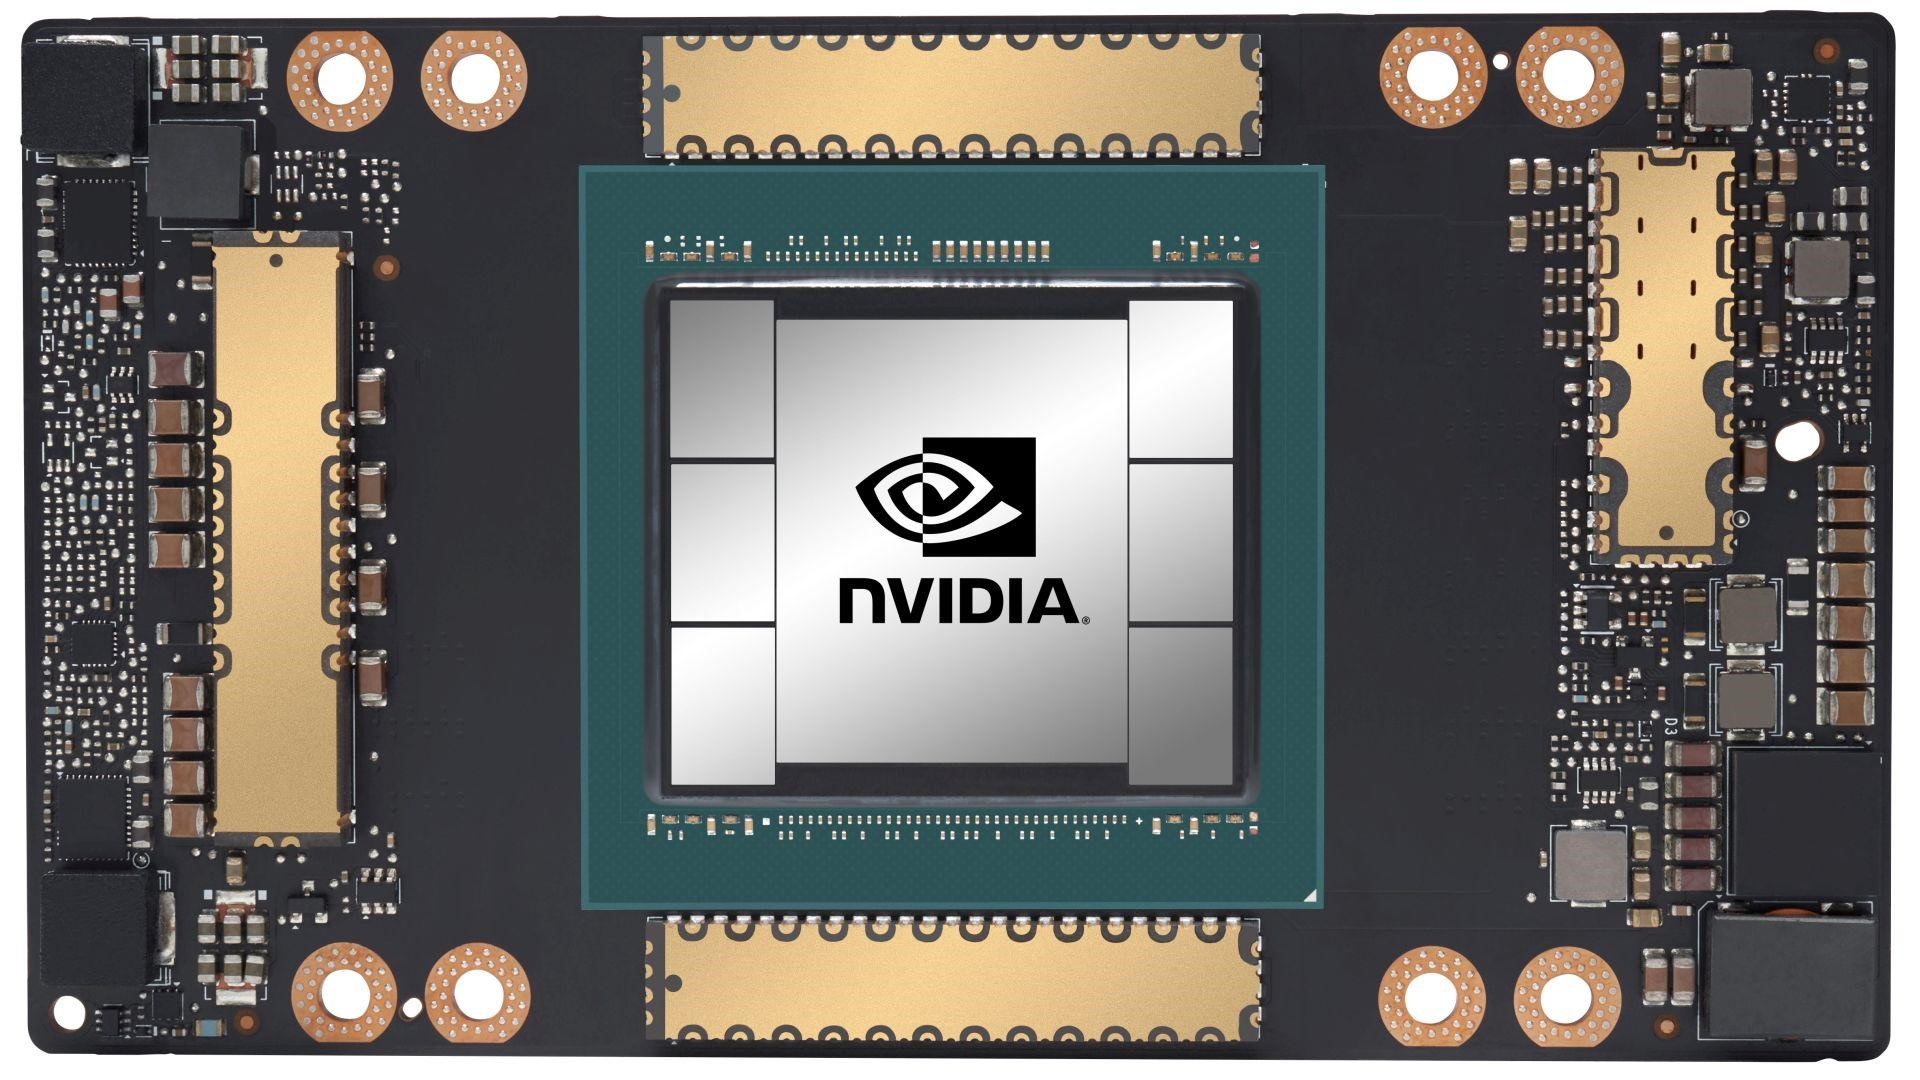 New leak says Nvidia GeForce RTX 3080 Ti will feature 12 GB of GDDR6X VRAM and 10,240 CUDA cores